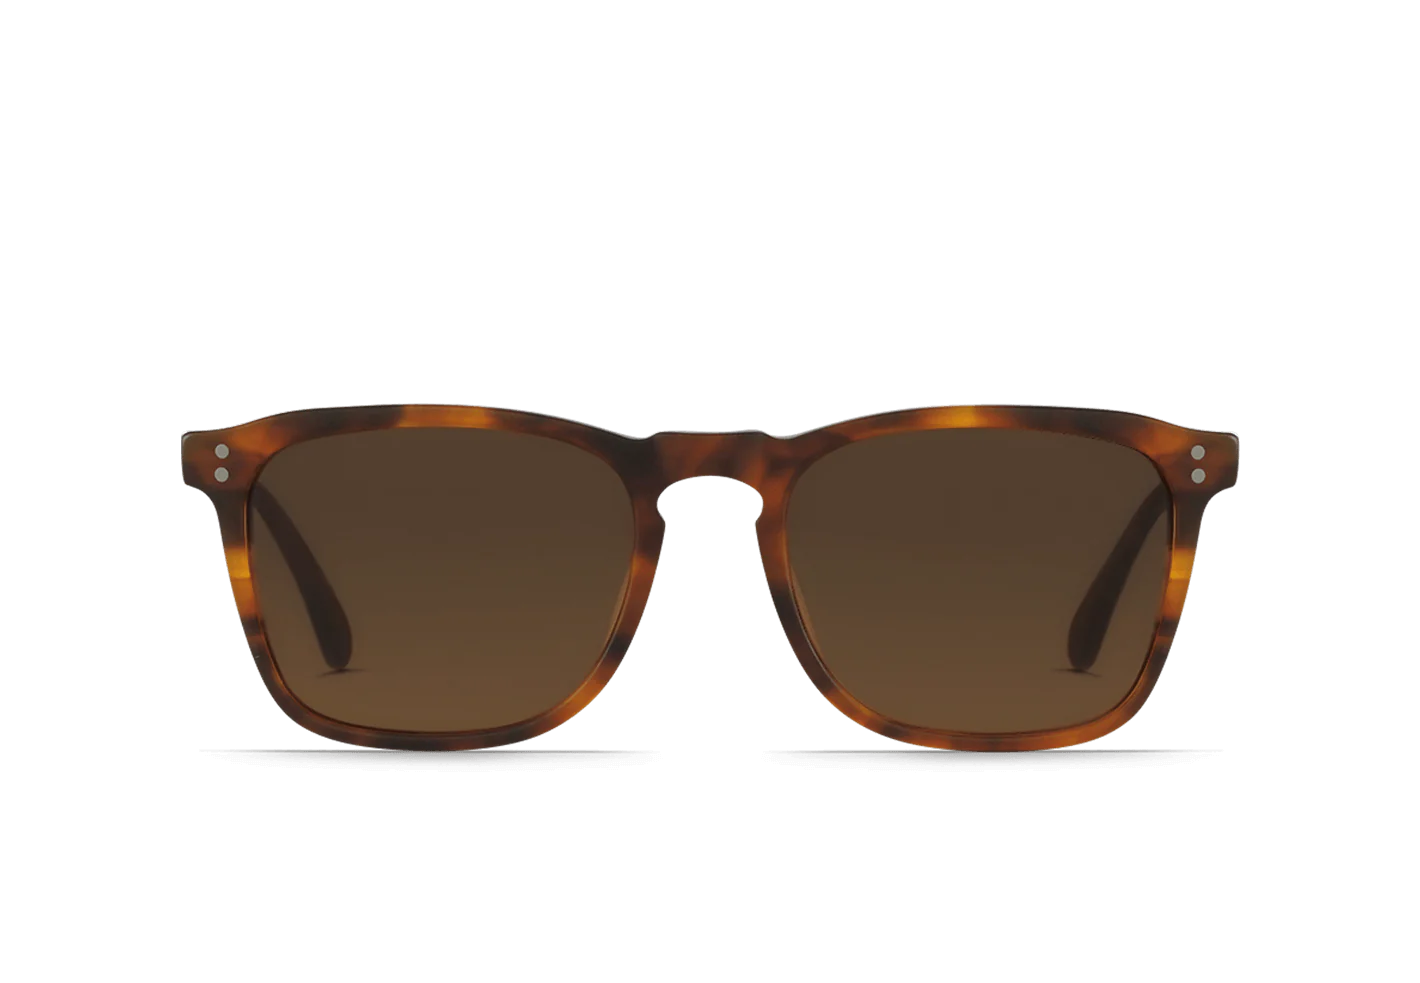 RAEN's Wiley Men's Square Sunglasses with Matte Rootbeer frames and Brown lenses